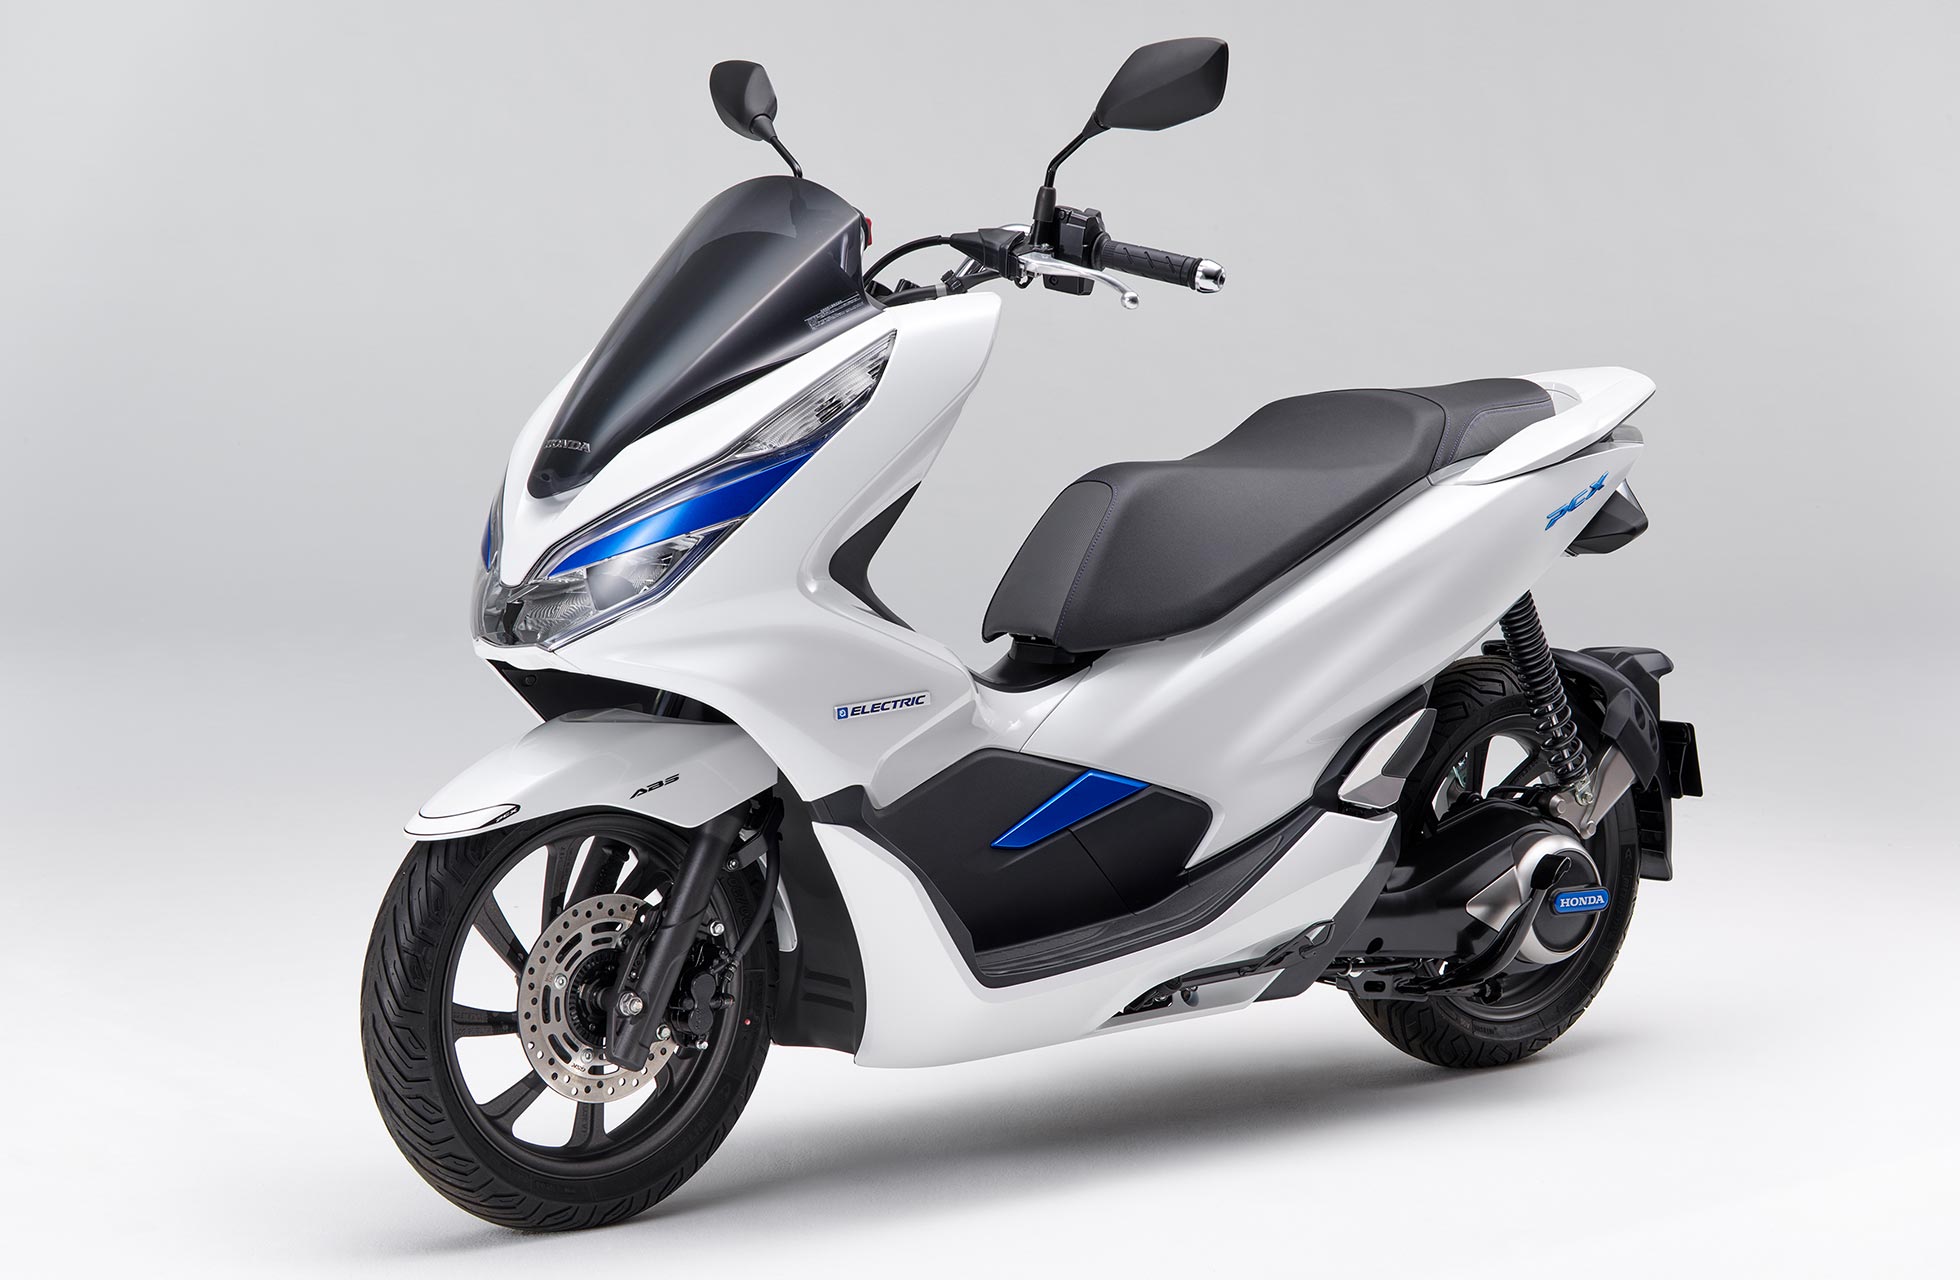 Honda Global Efforts to Promote the Use of Electric Motorcycles